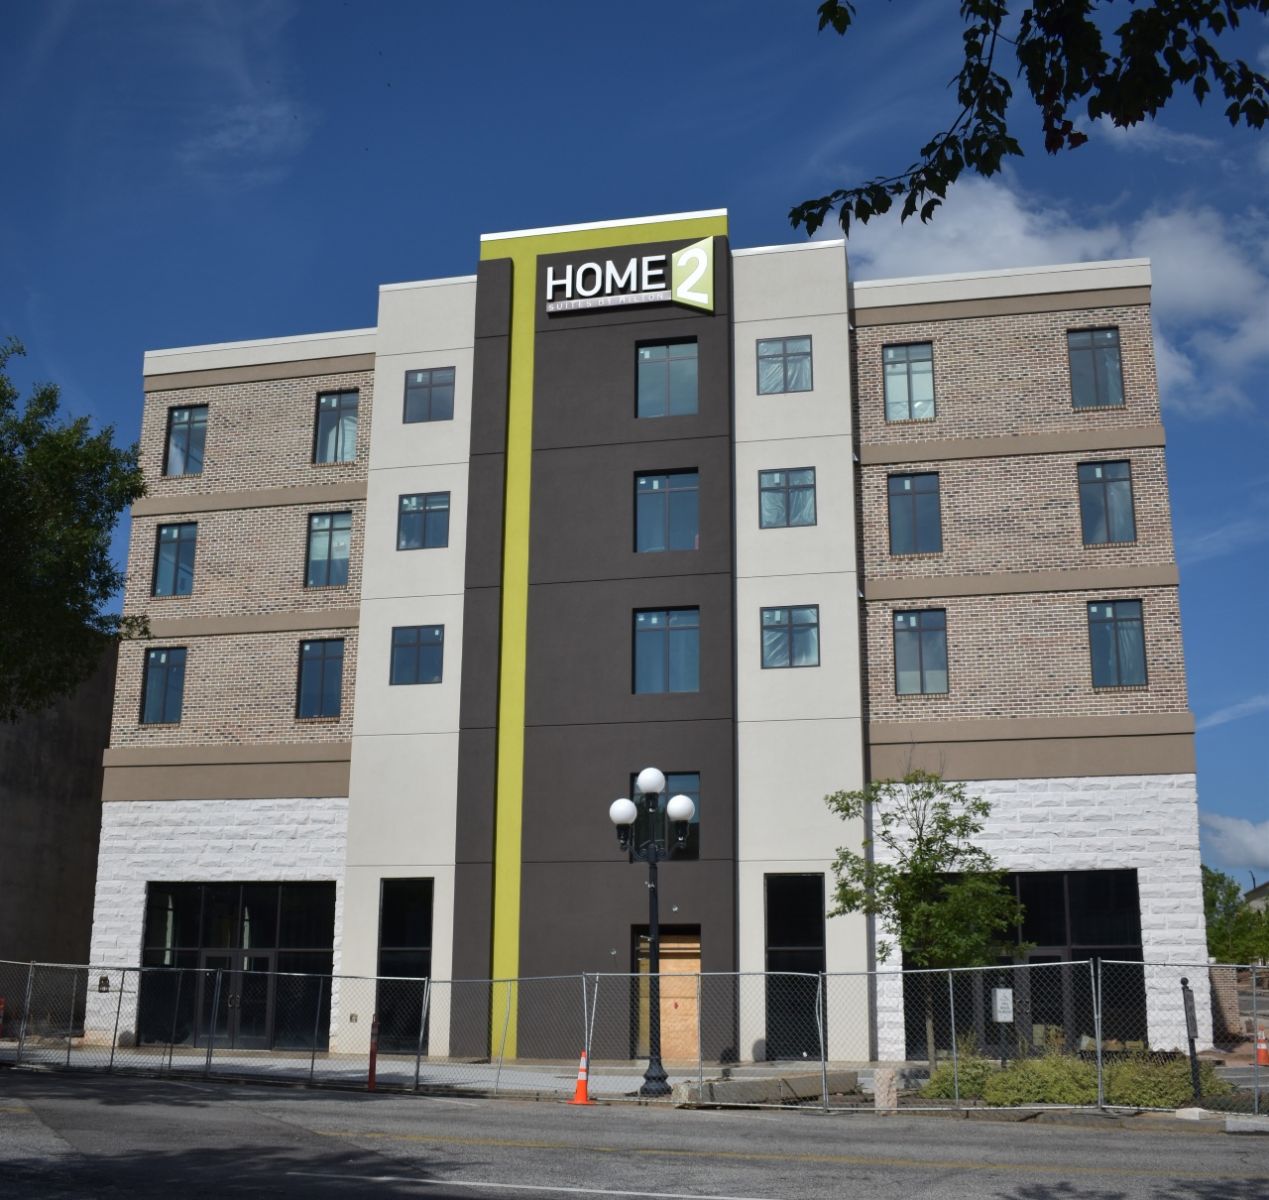 Construction on Anderson's Homes2Suites is set to conclude Aug. 20 under the direction of Van Winkle Construction and Fontaine Construction. (Photo/Molly Hulsey)